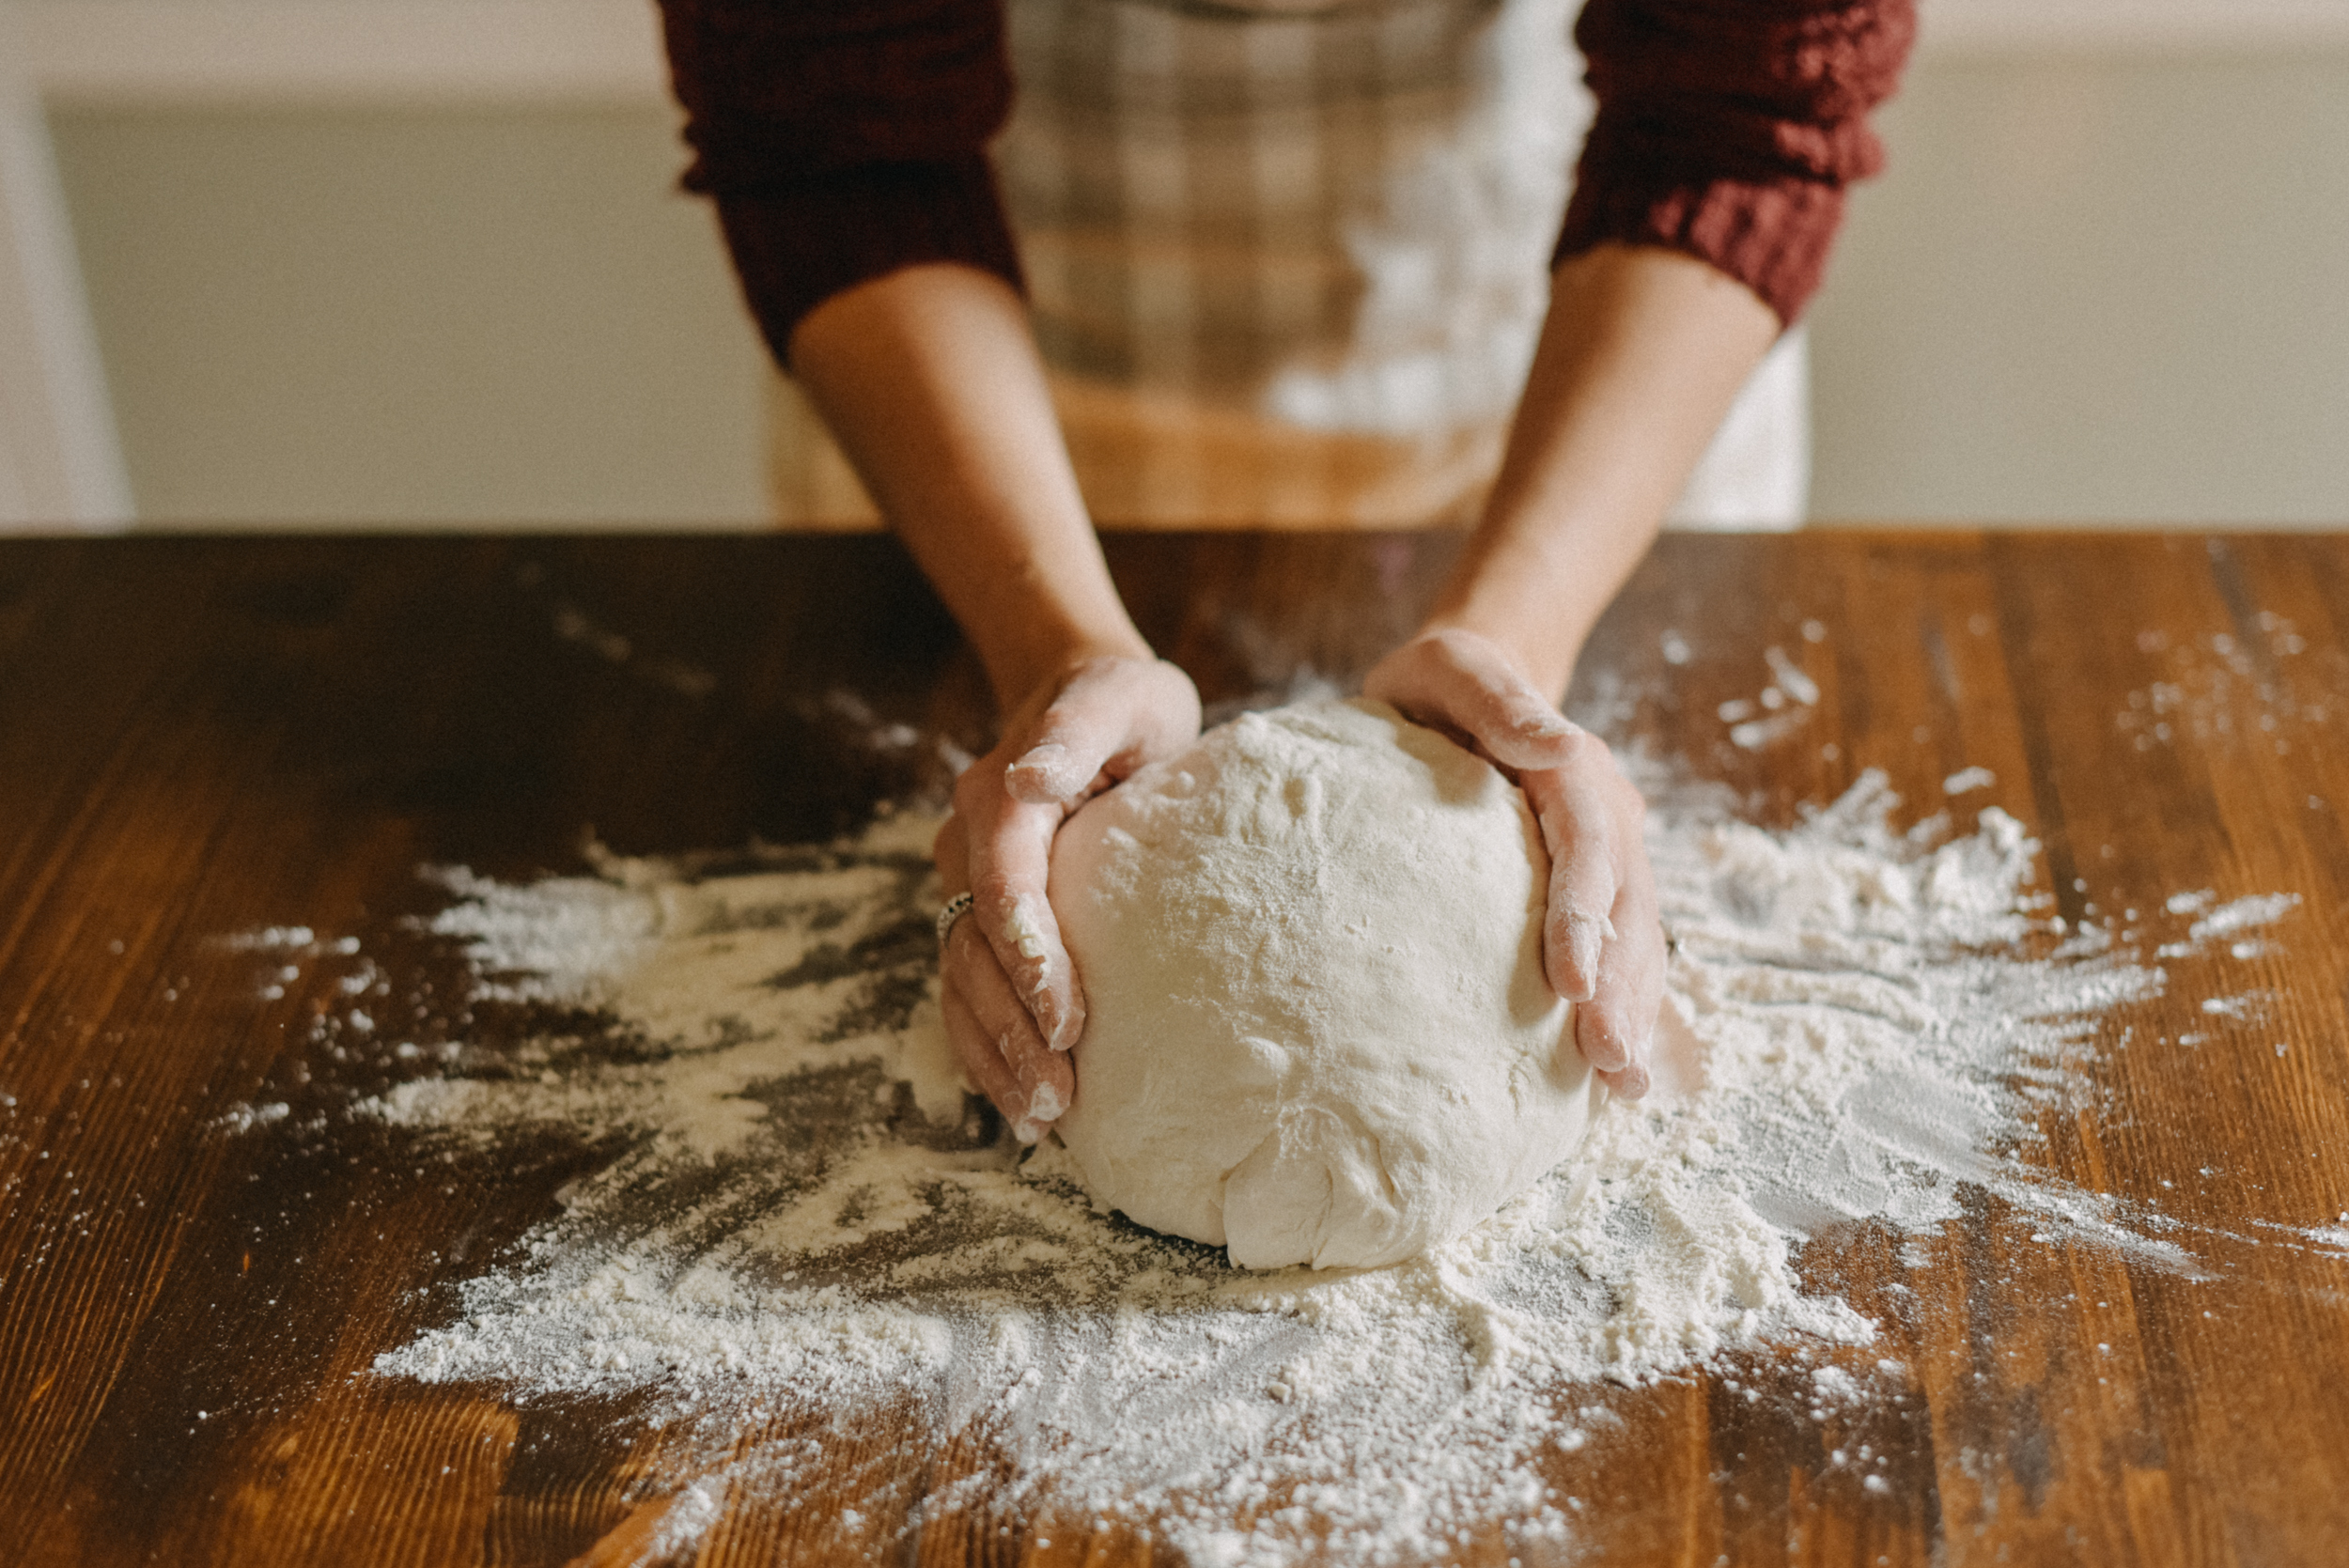 Person kneading dough on a wooden surface